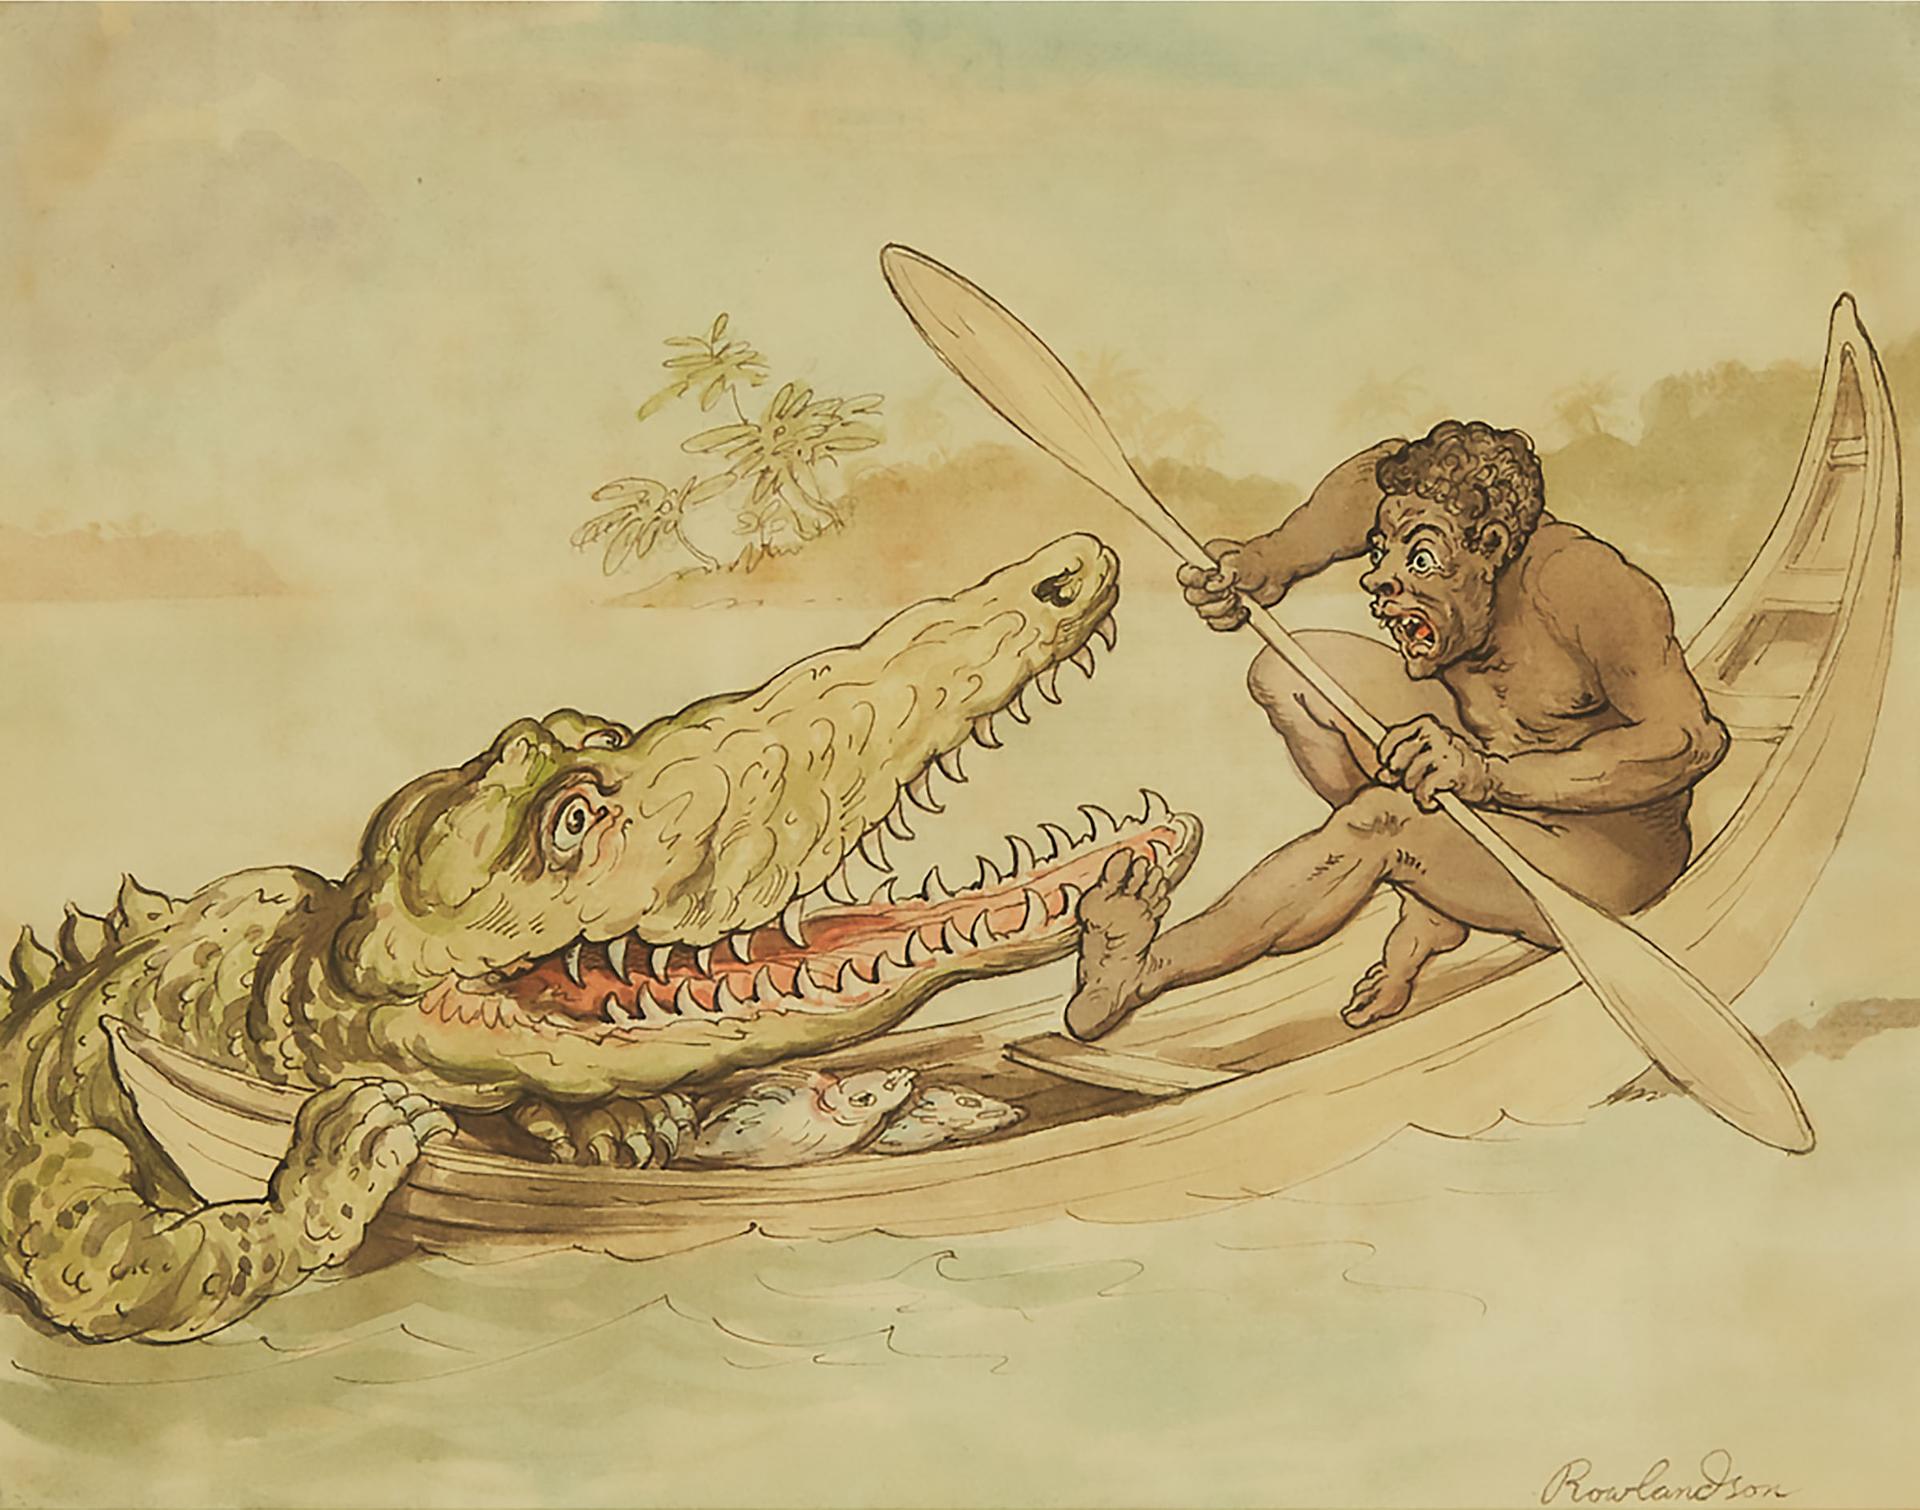 Thomas Rowlandson (1756-1827) - Man In A Boat Attacked By A Crocodile